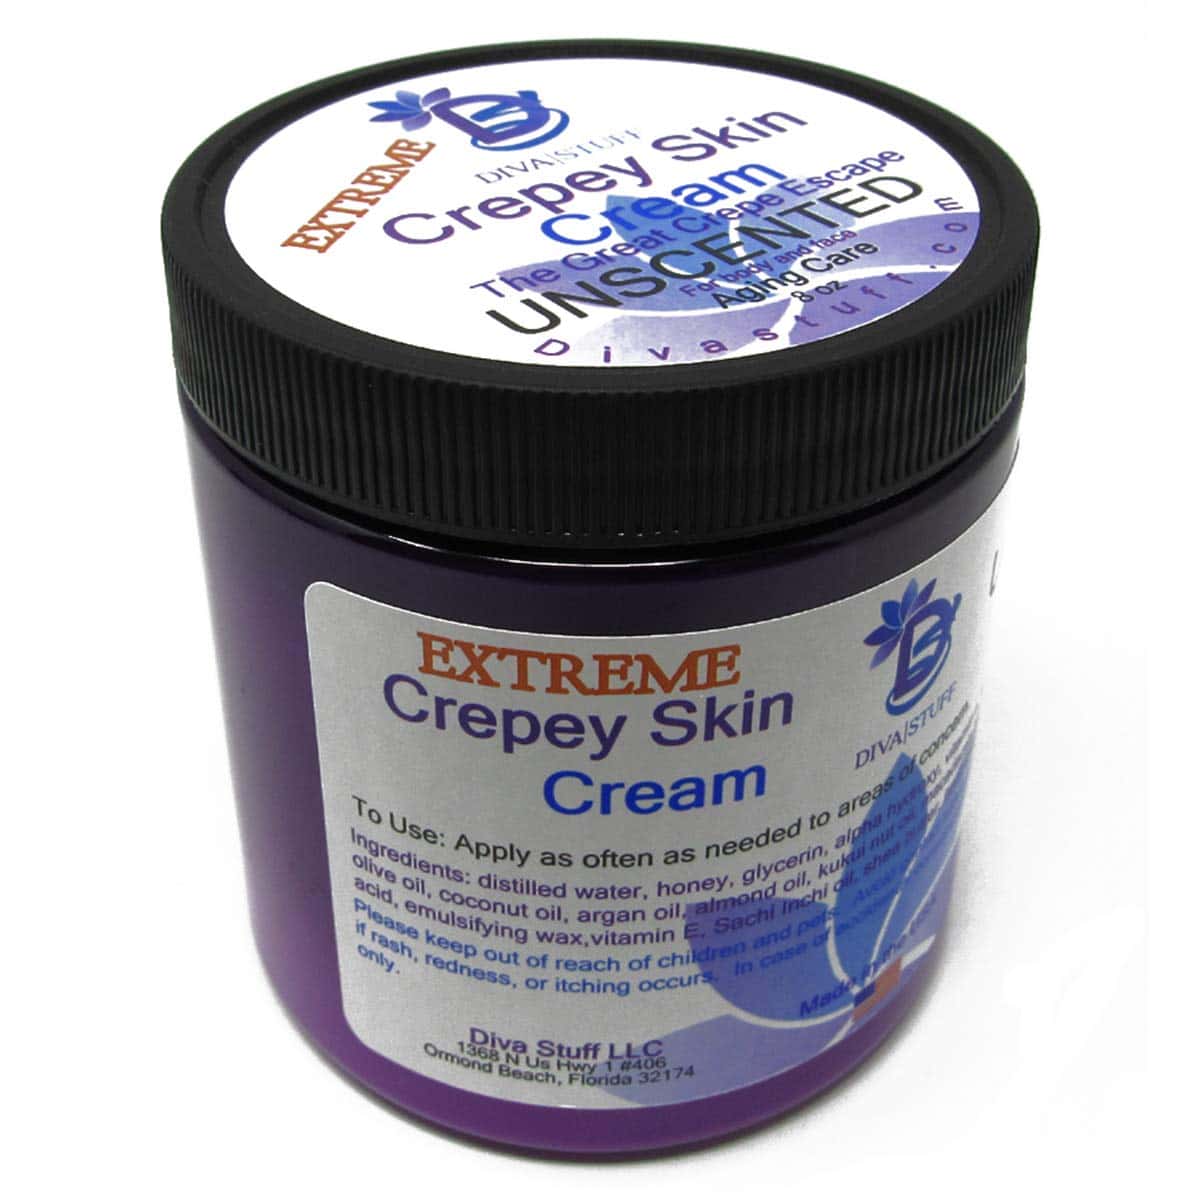 10 Best Lotion for Crepey Skin 2020 (on Arms, Legs, Face and Skin...)